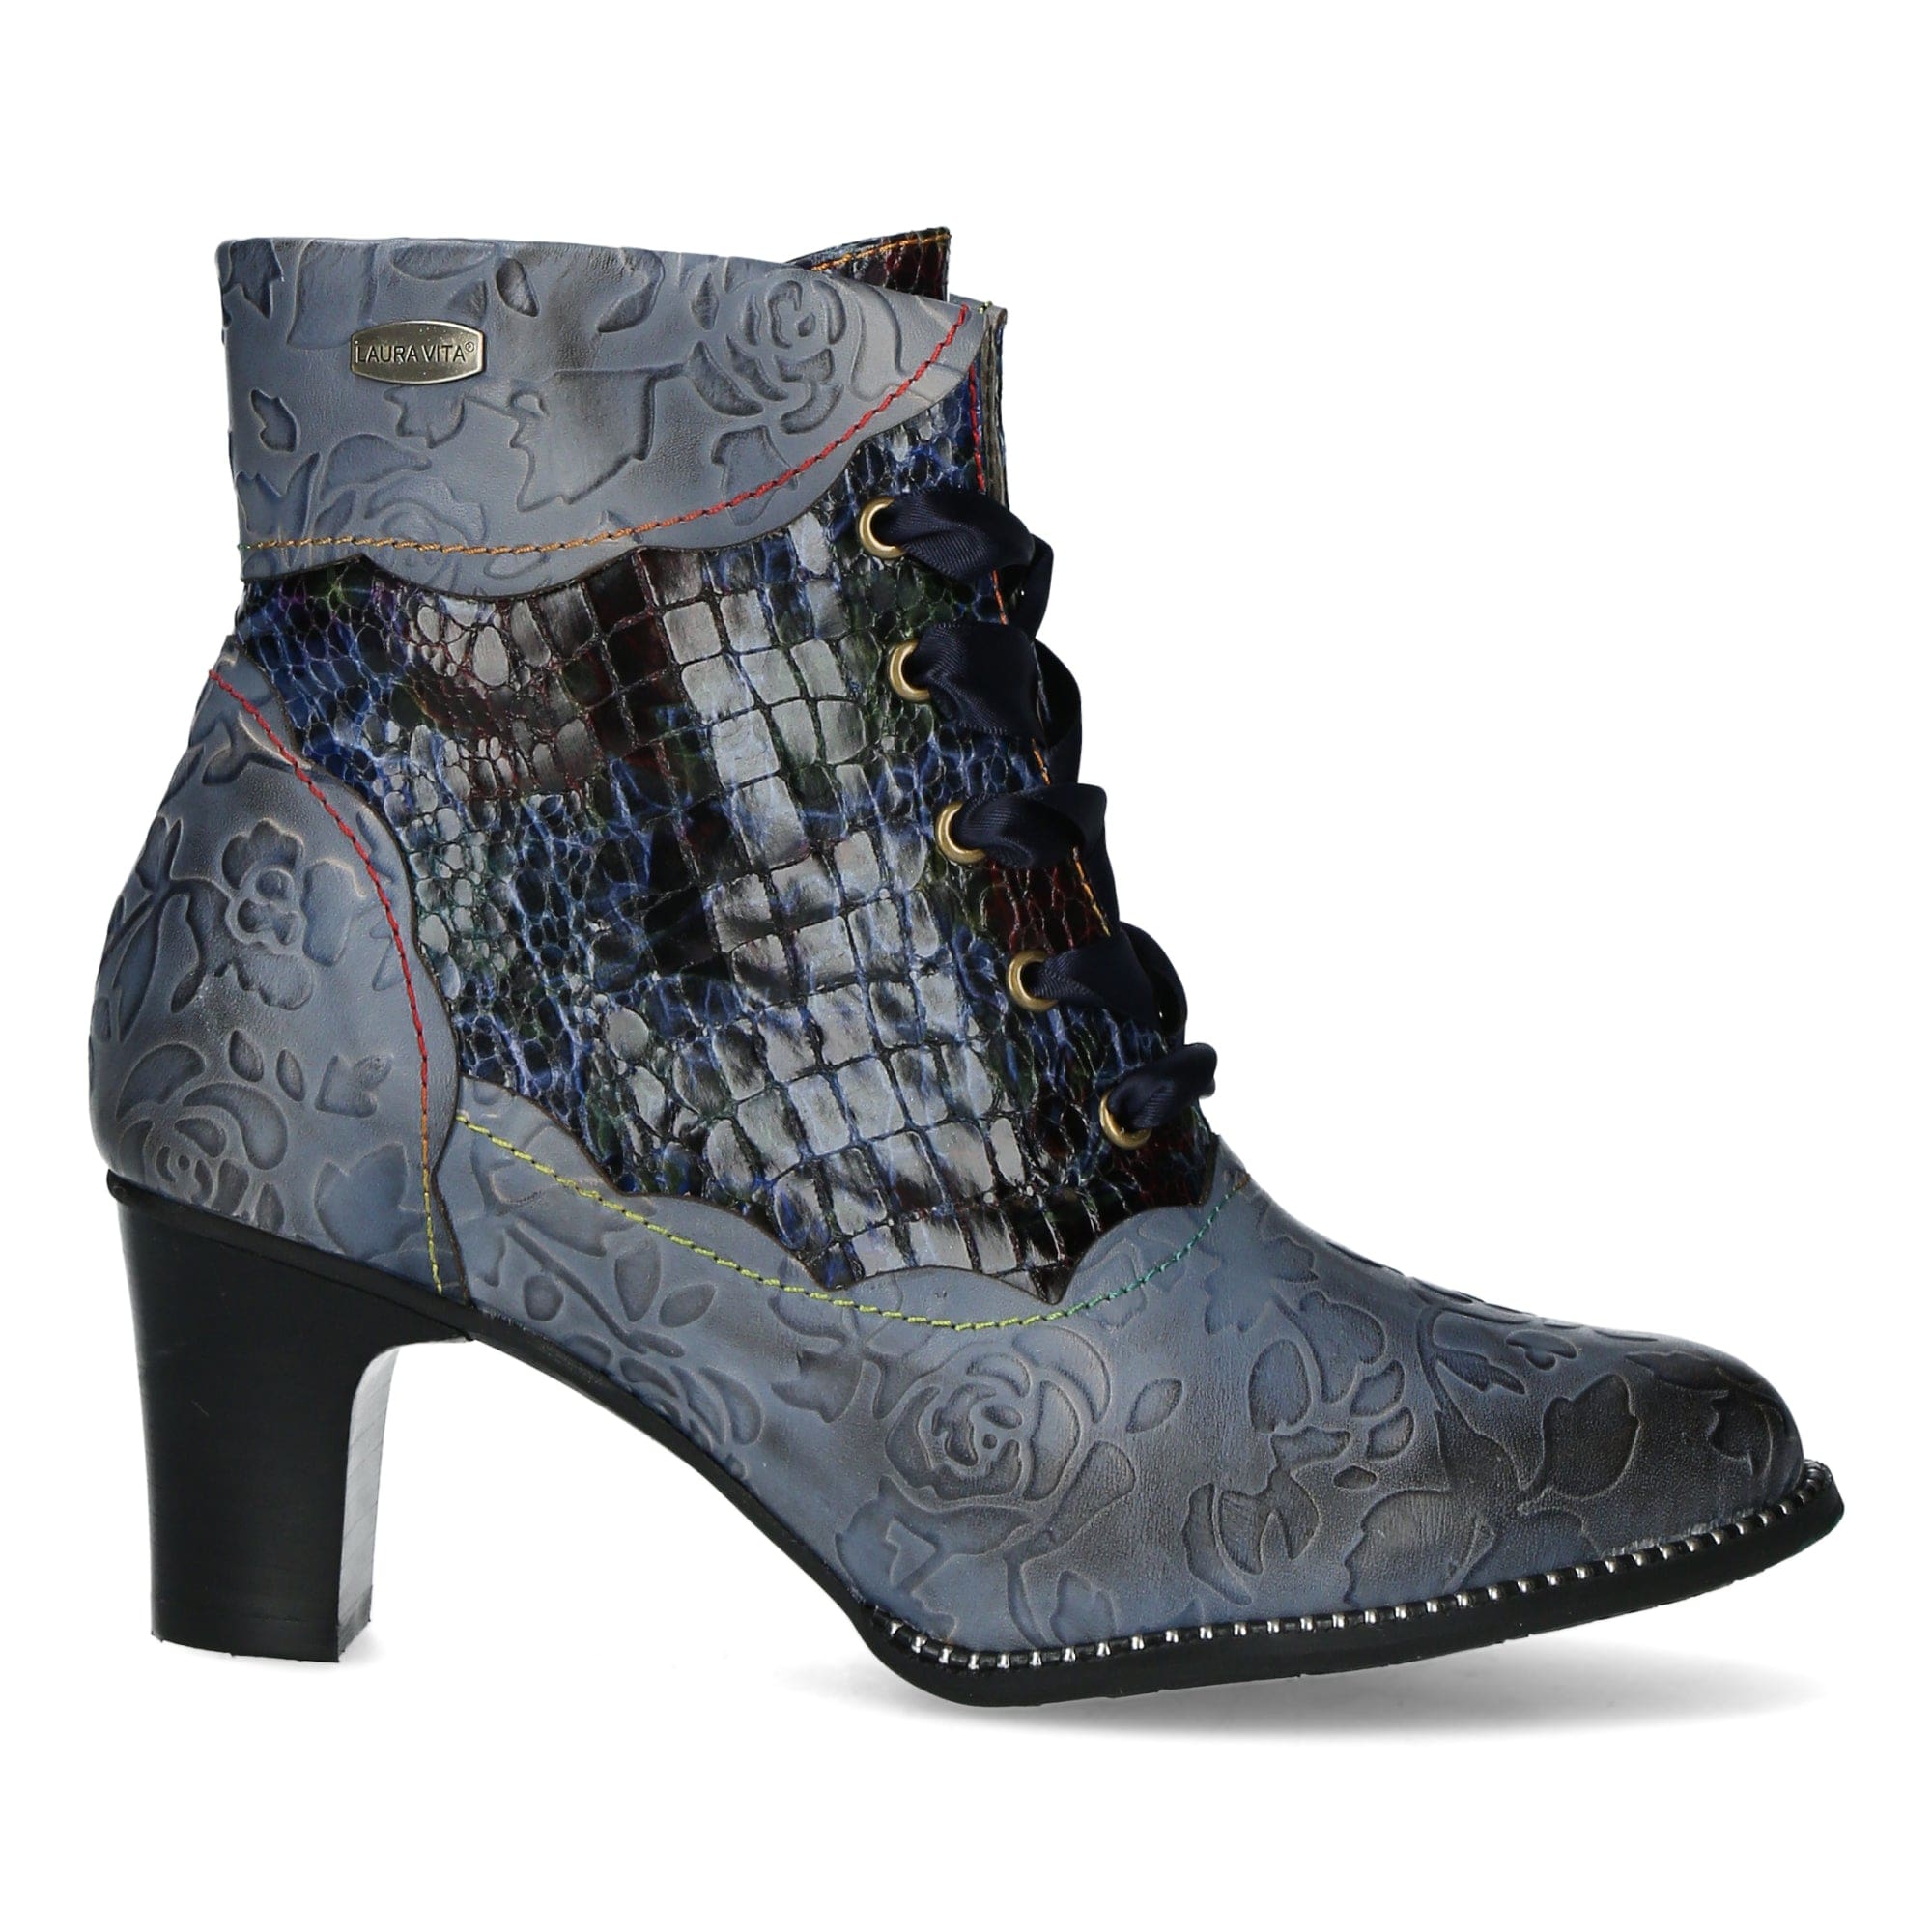 Chaussure ELCODIEO 05B - 35 / Jeans - Boots